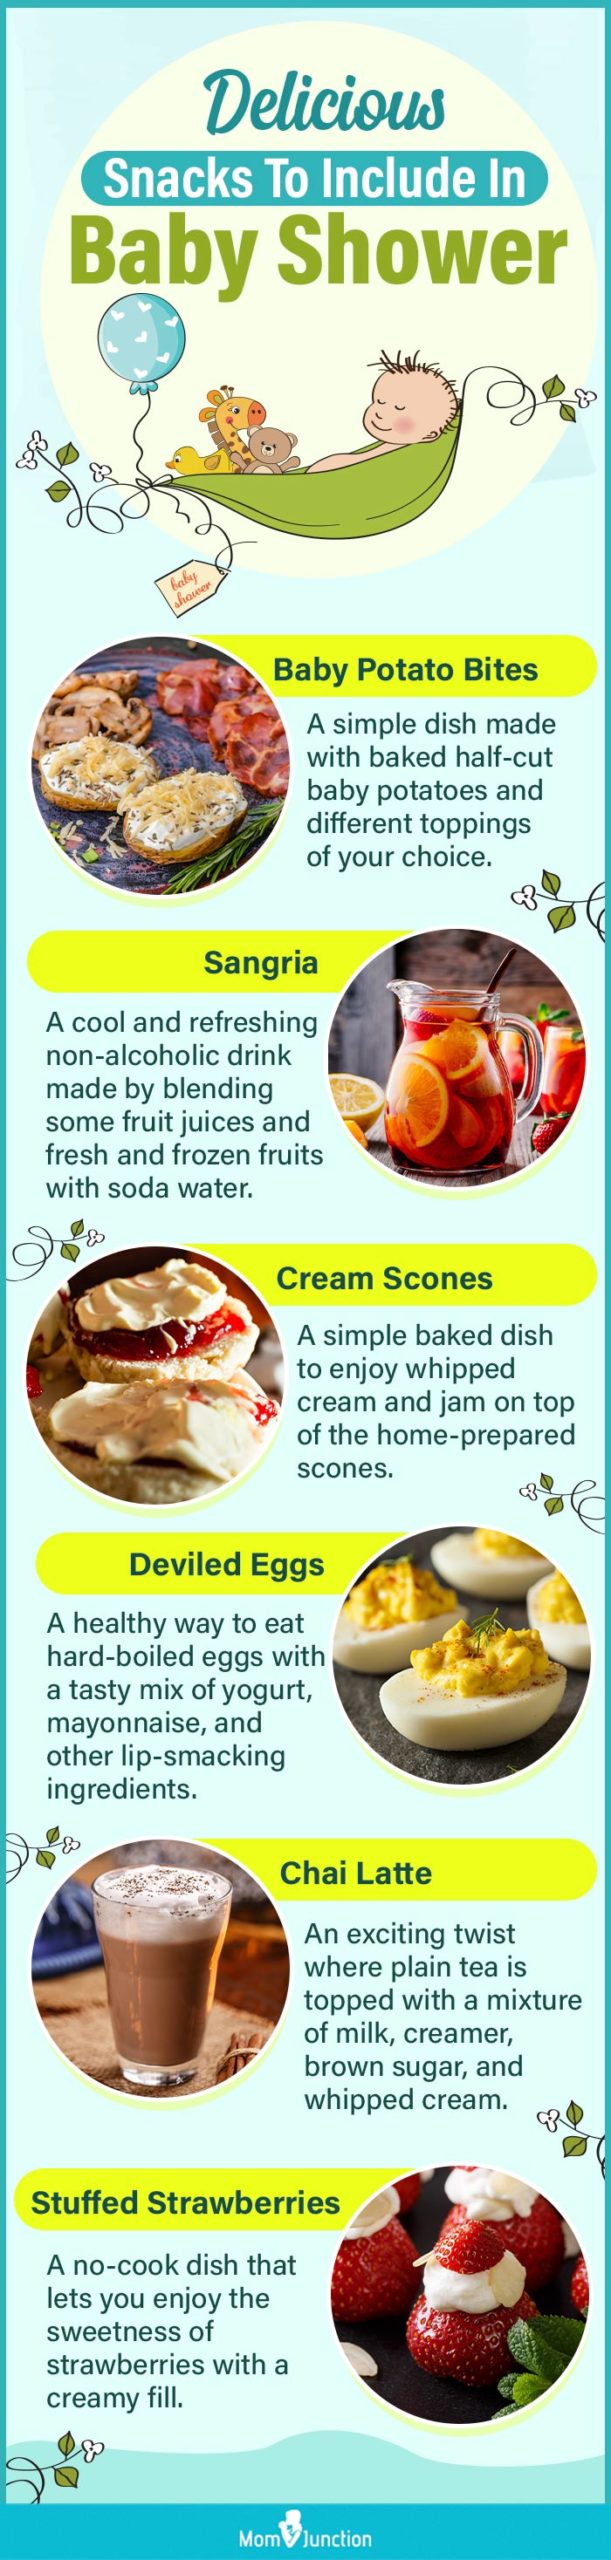 delicious snacks to include in baby shower (infographic)